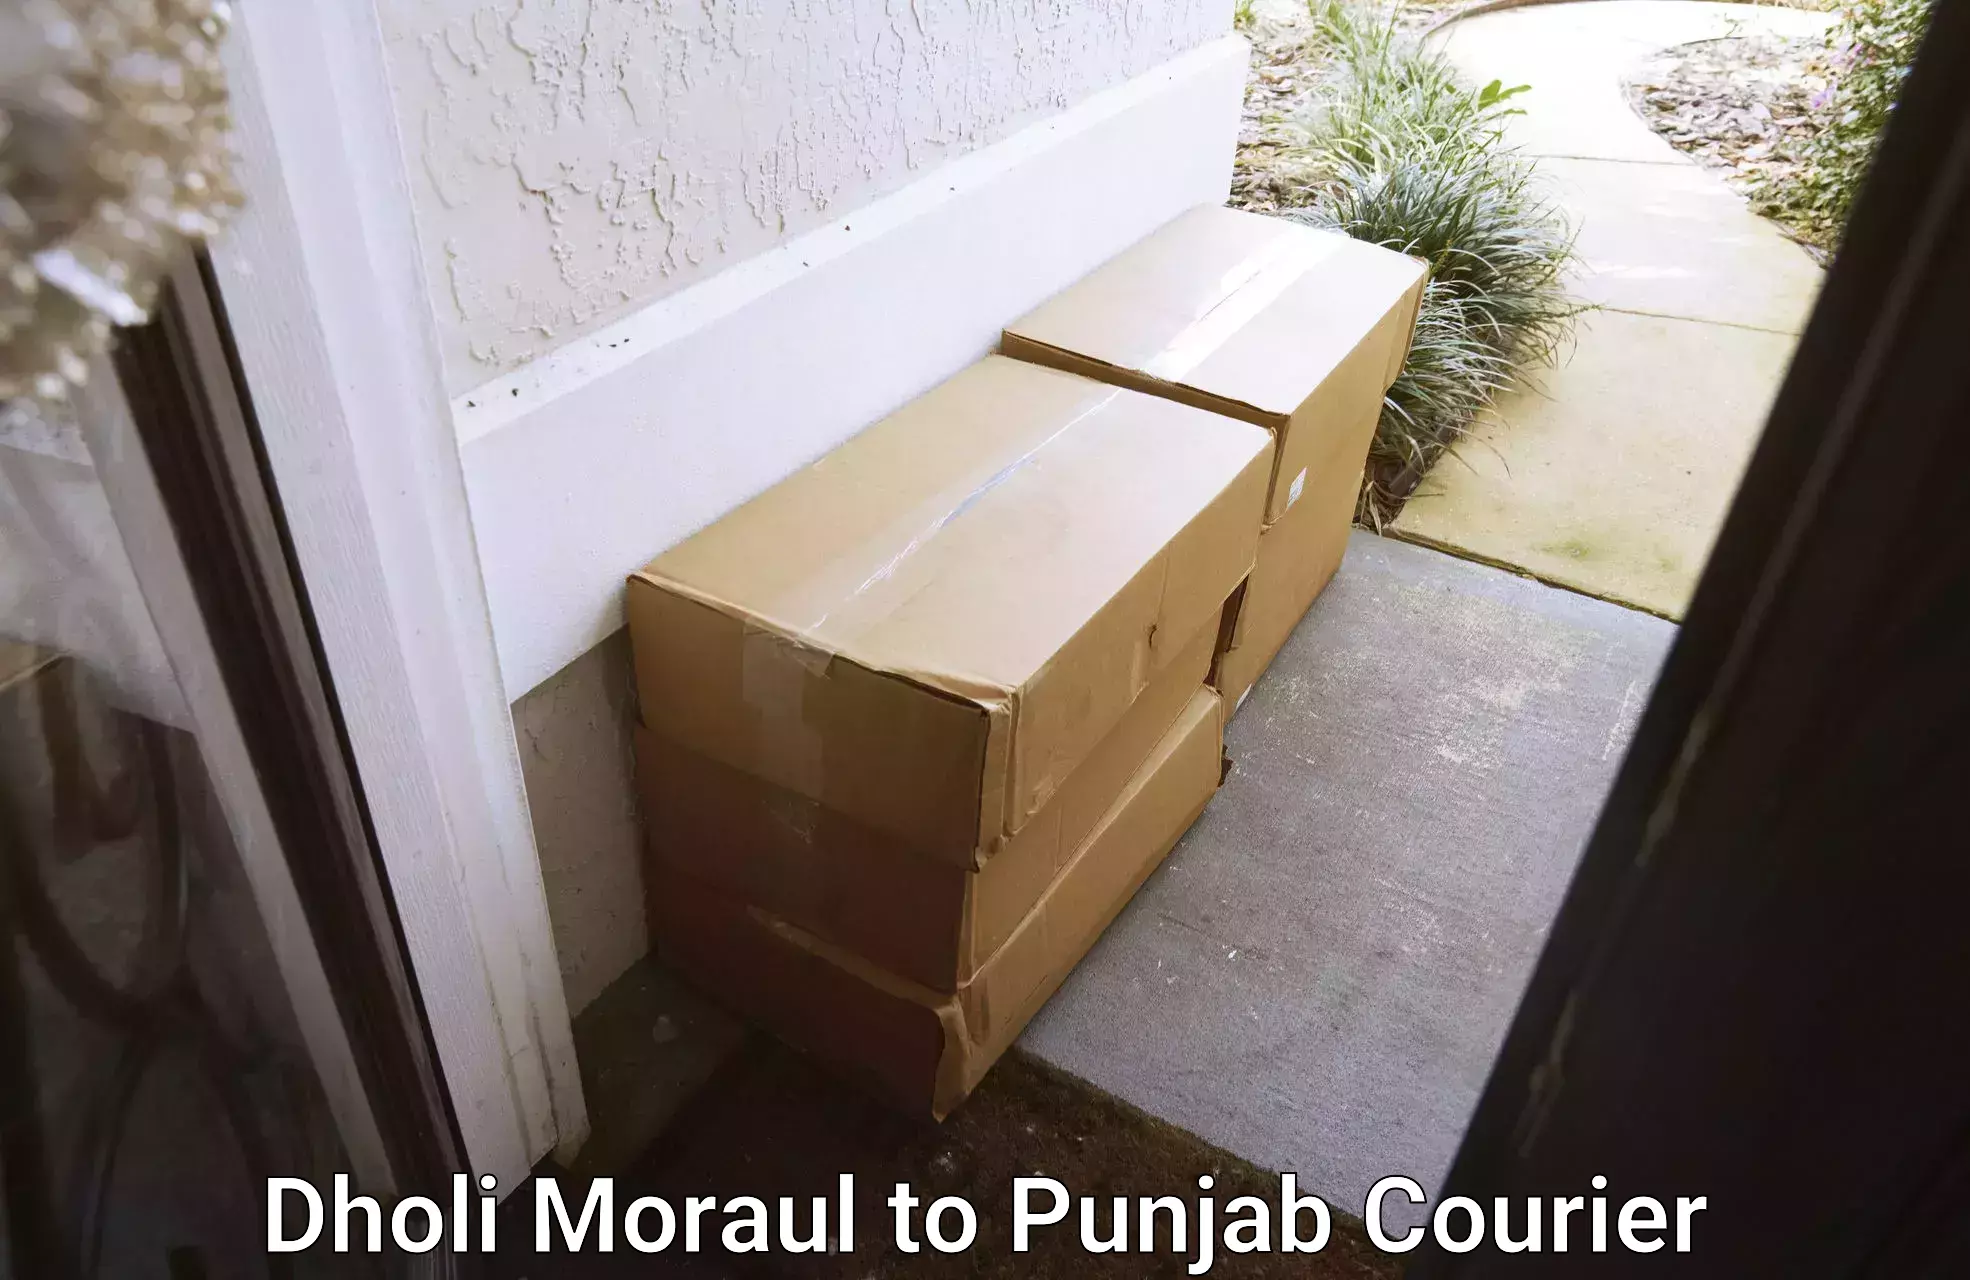 Budget-friendly movers Dholi Moraul to IIT Ropar